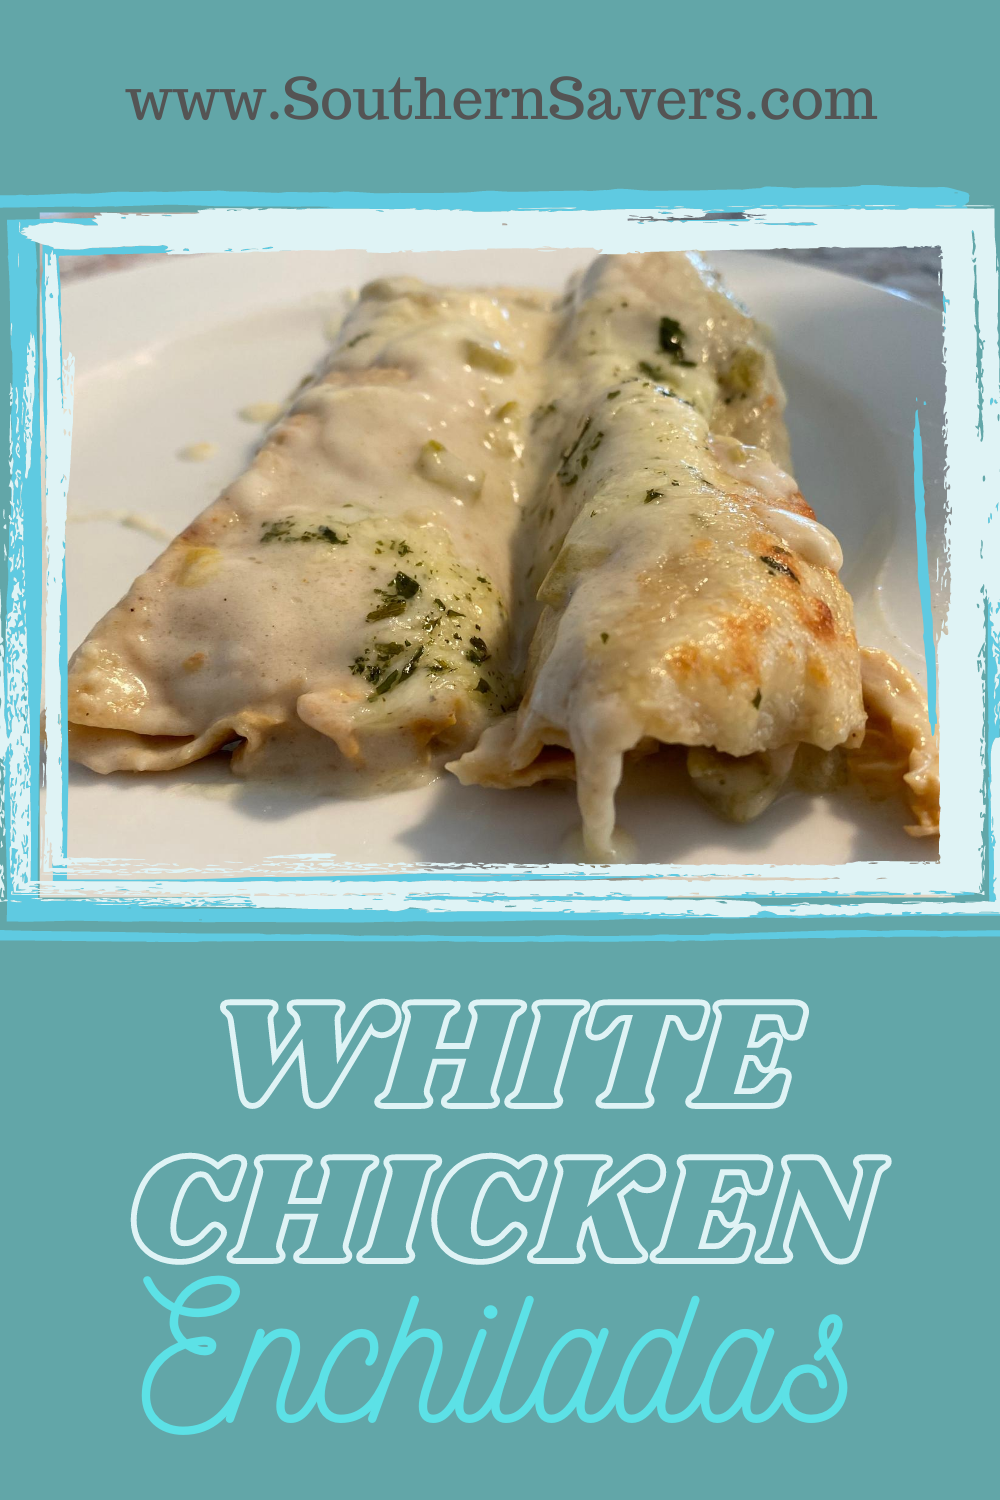 Looking for an simple but indulgent recipe? These cheesy white chicken enchiladas fit the bill, and your family will ask for them again!